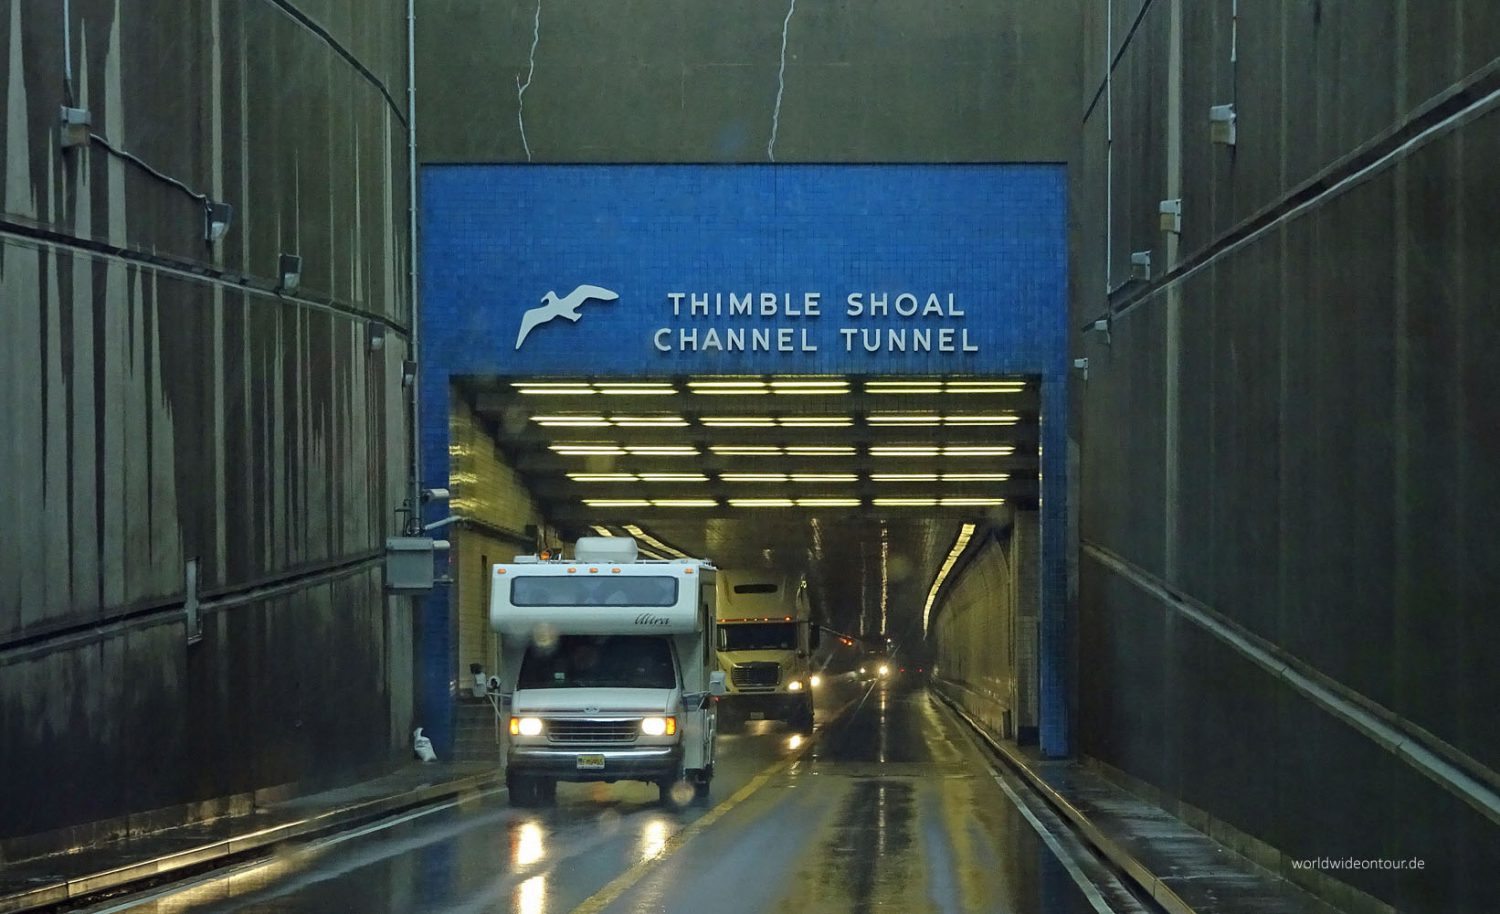 Der Timble-Shoal-Channel-Tunnel.